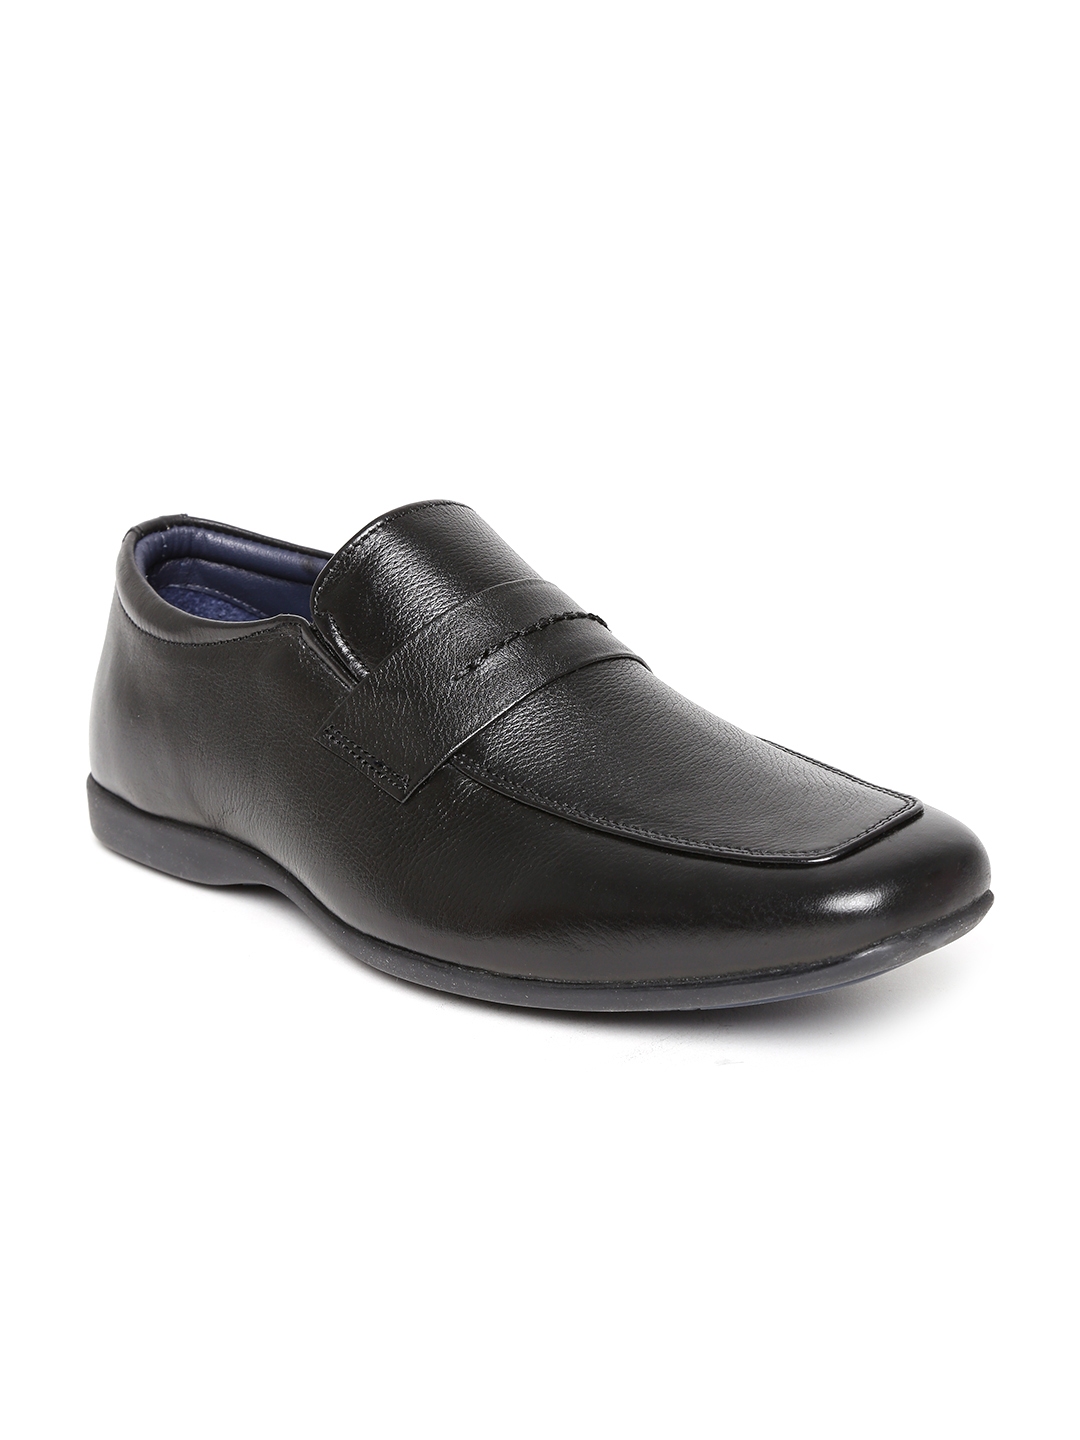 Buy Hush Puppies By Bata Men Black Leather Formal Shoes - Formal Shoes ...